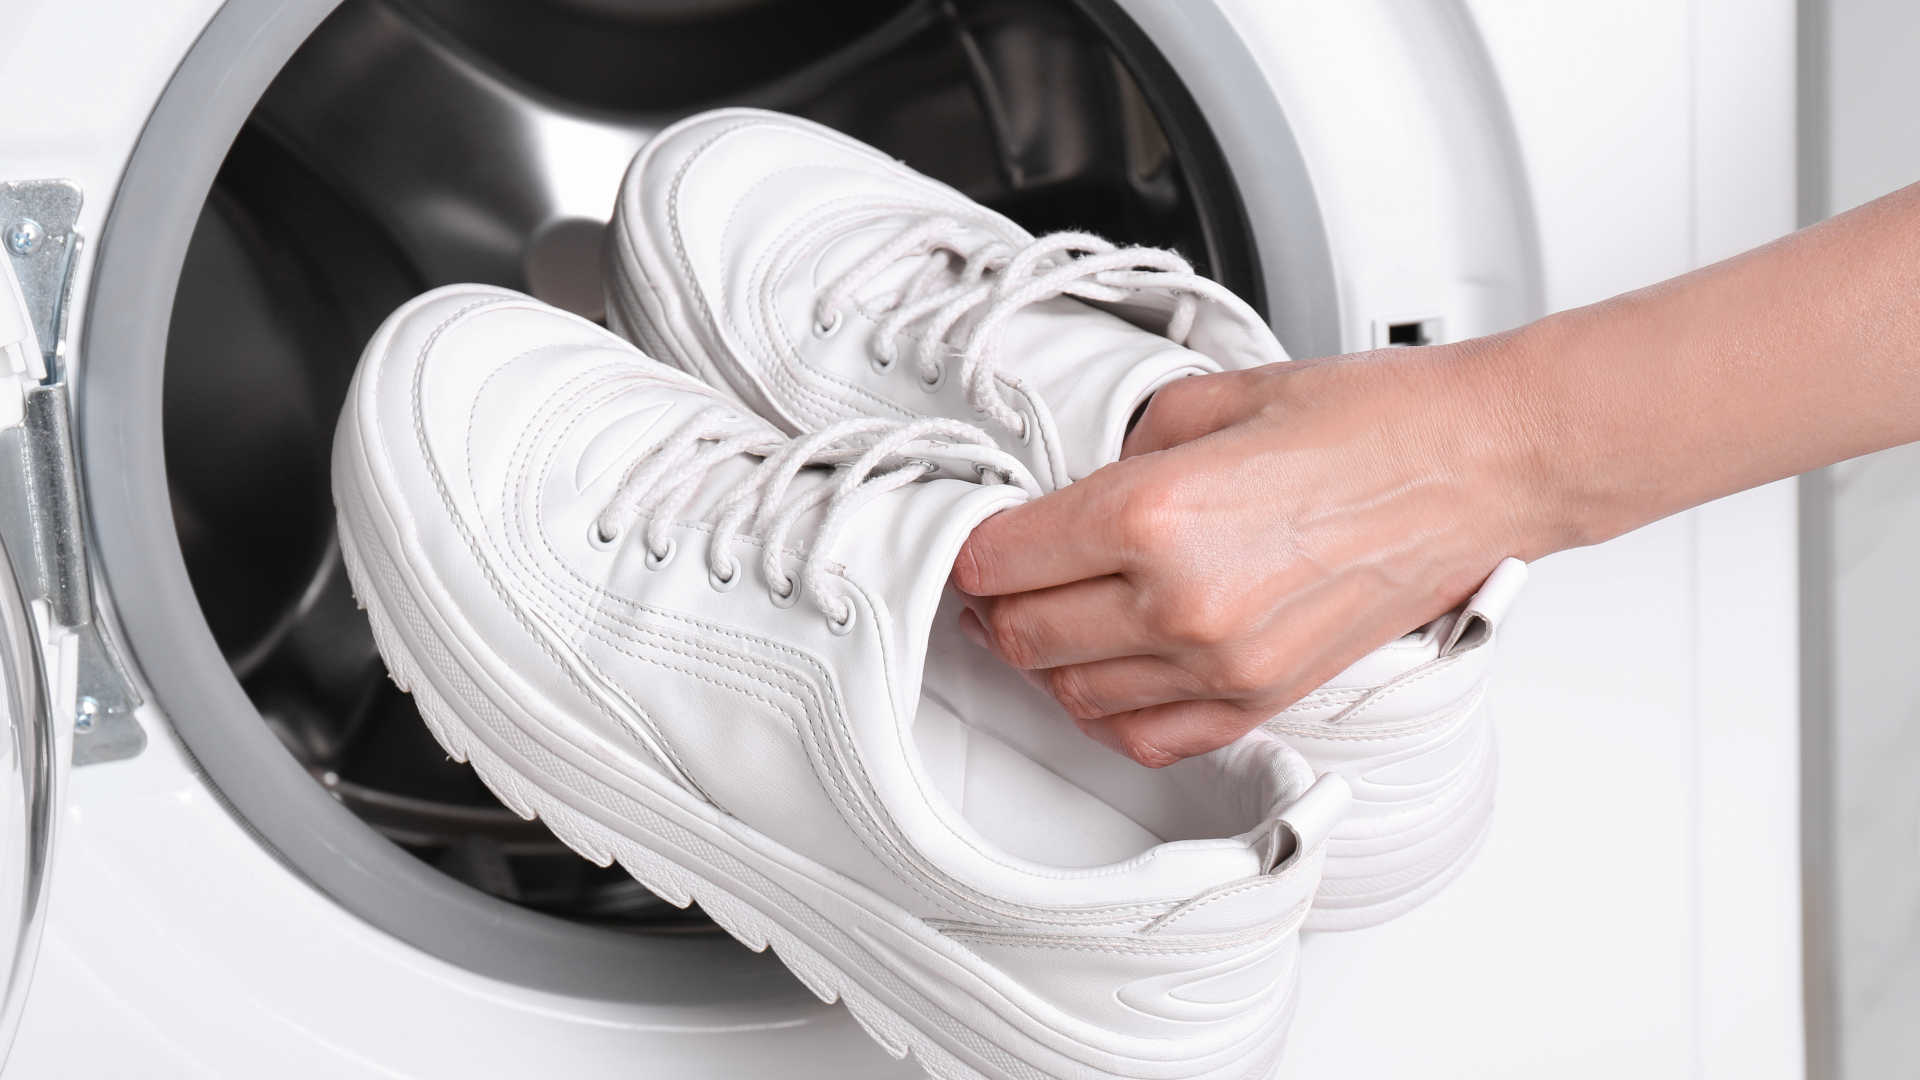 Tips for Washing Shoes at the Laundromat | Liquid Laundromats